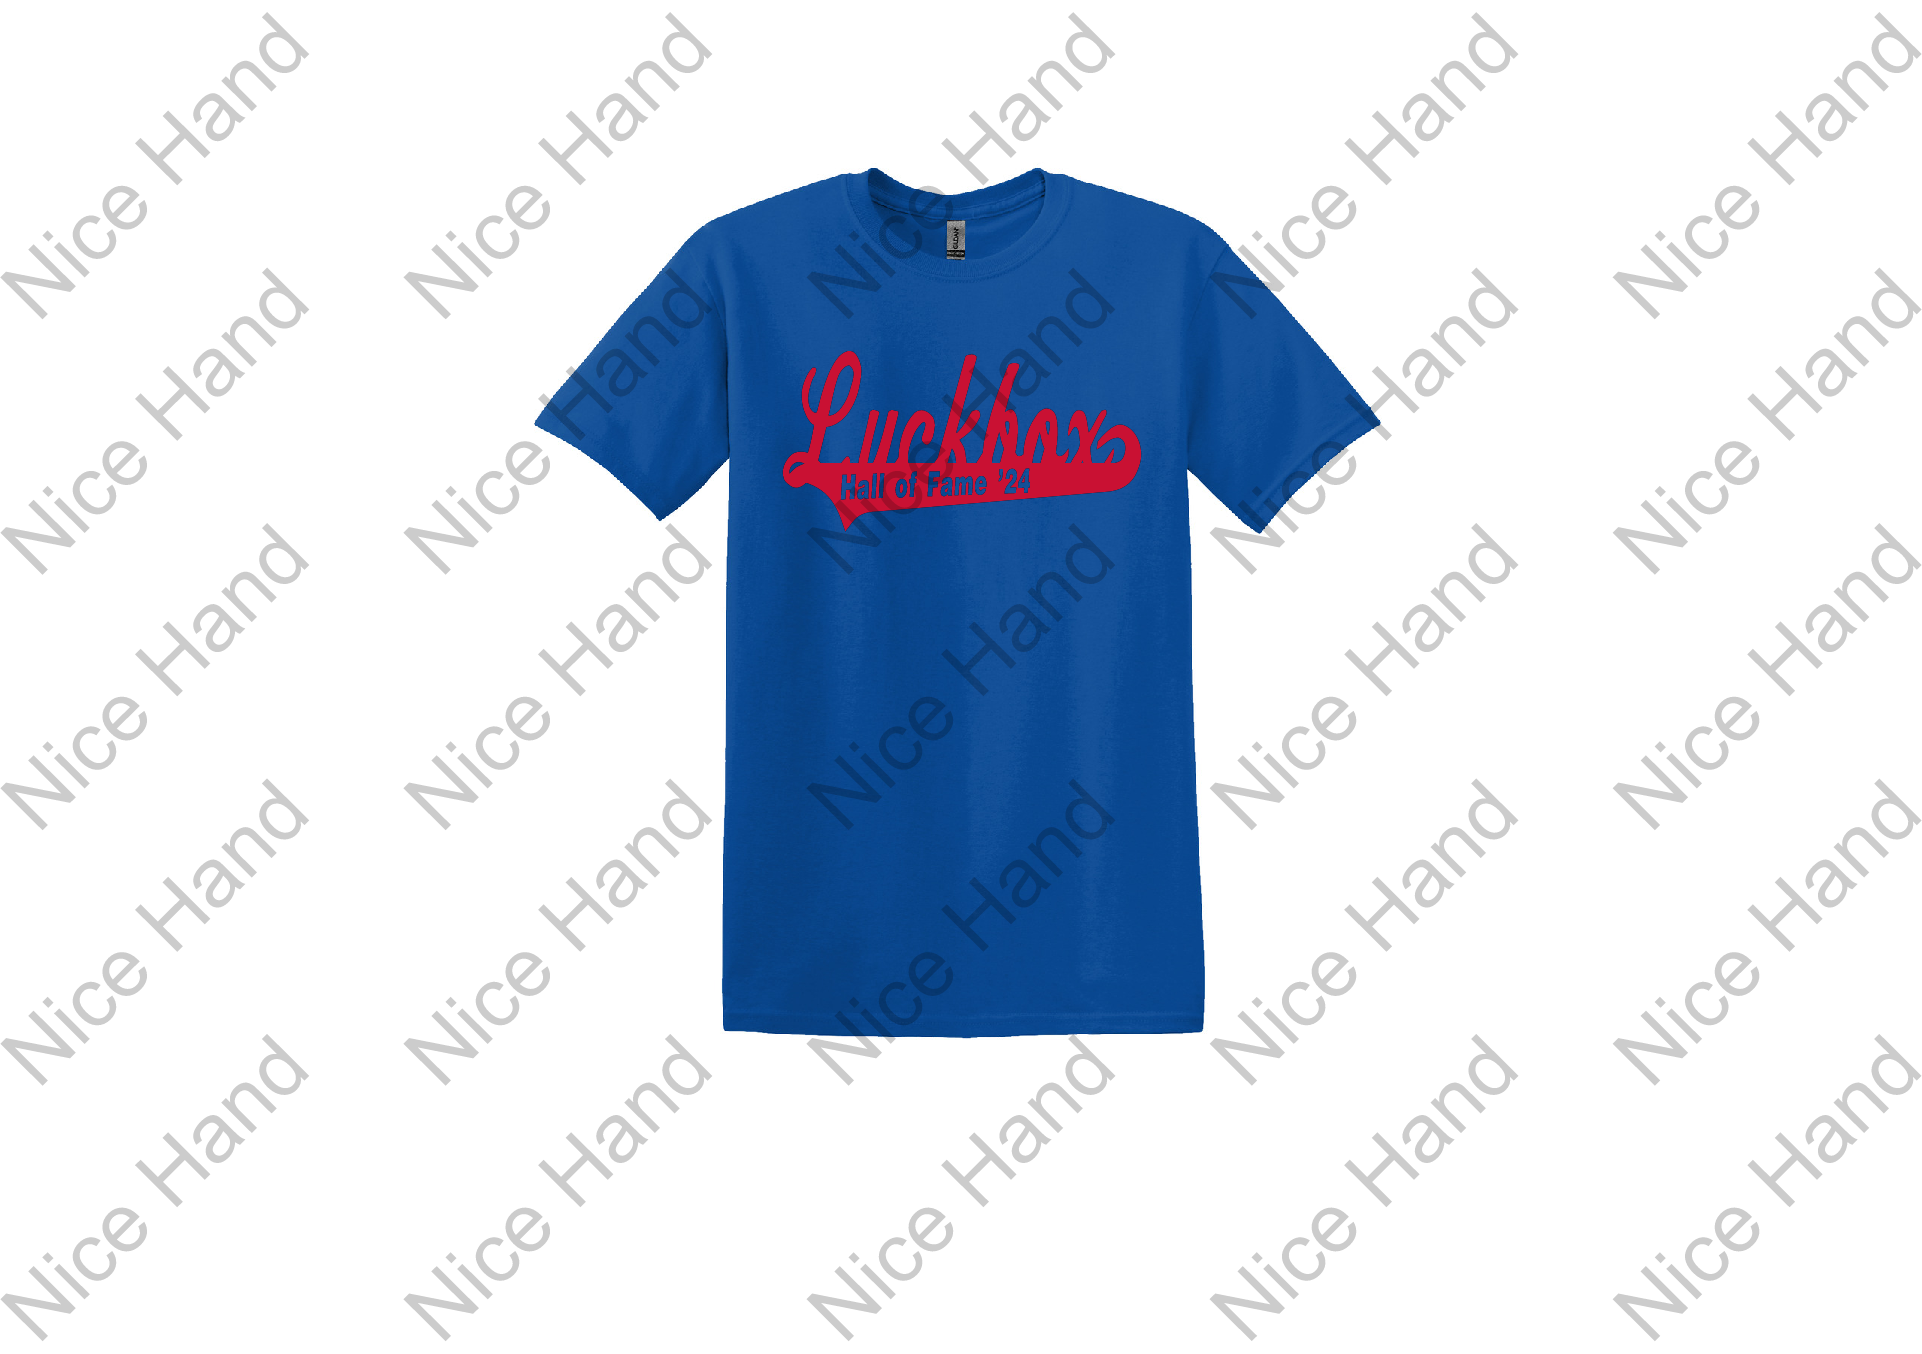 Luckbox hall of fame. Blue with Red Lettering